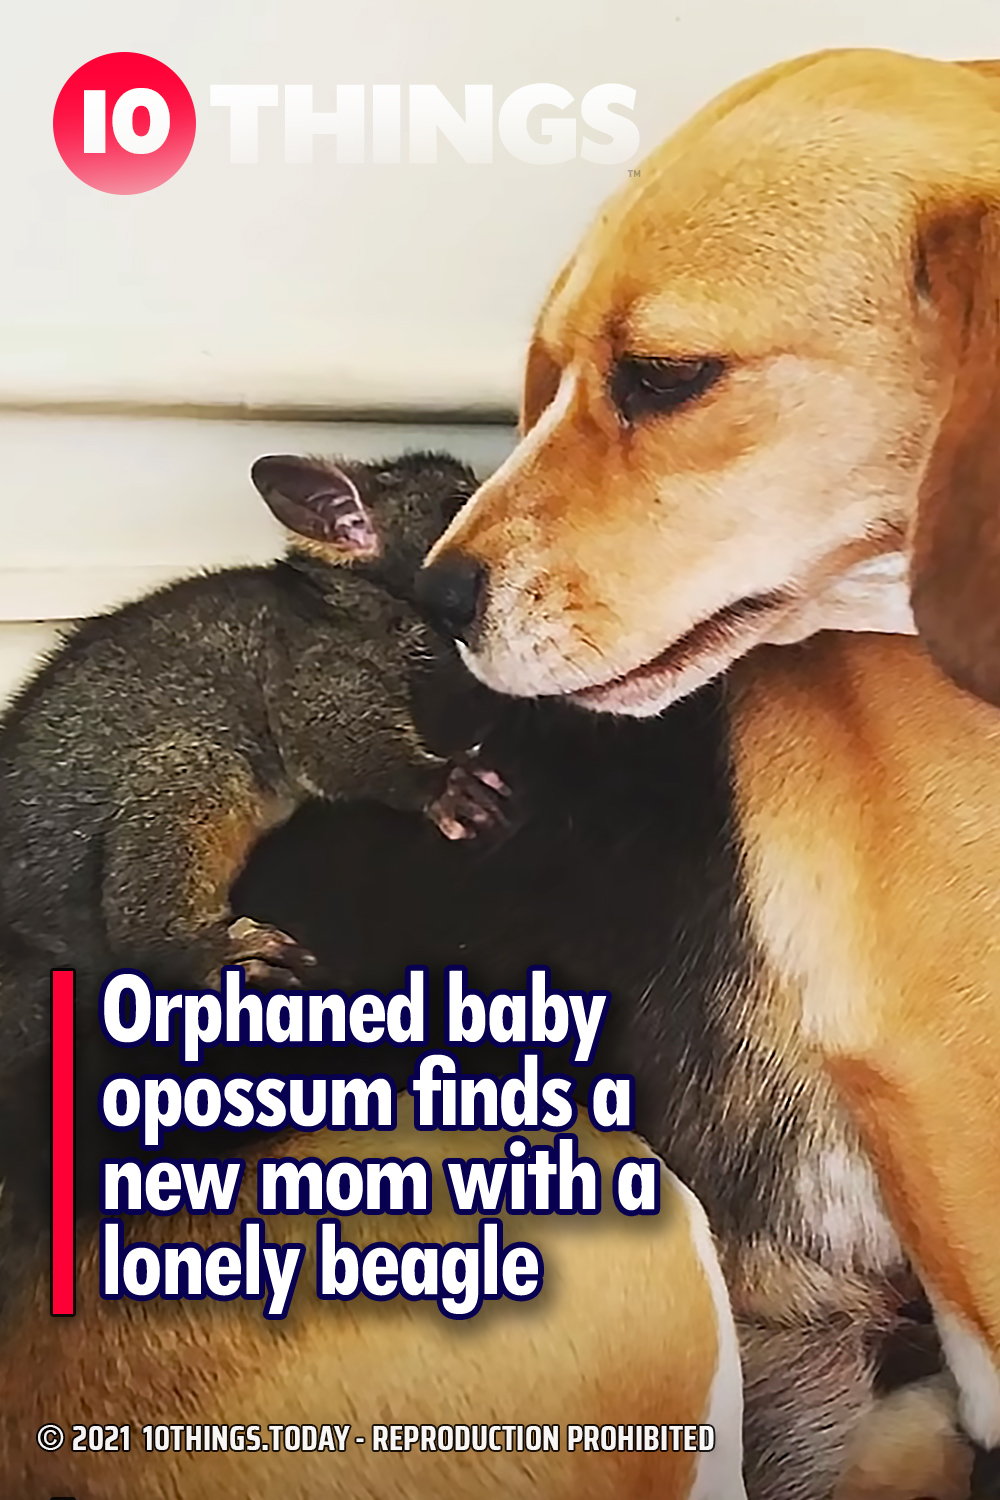 Orphaned baby opossum finds a new mom with a lonely beagle